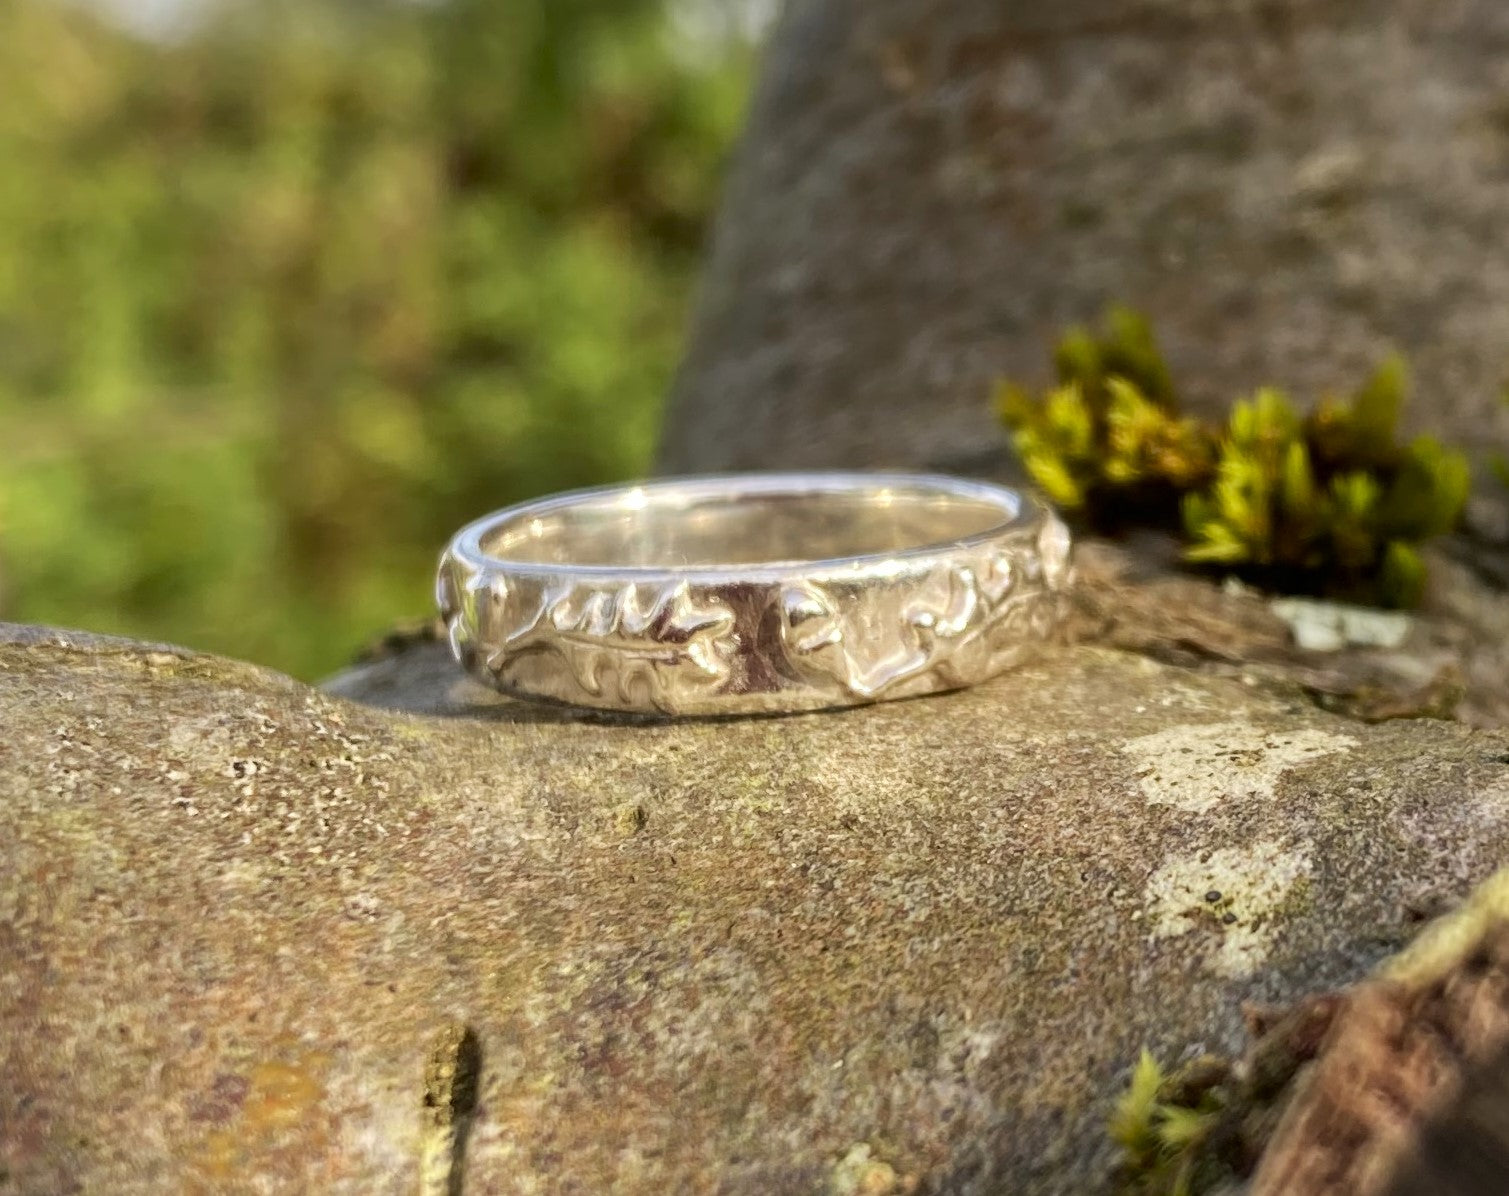 wide ring with oak leaves and acorns in relief around the band, resting on tree bark